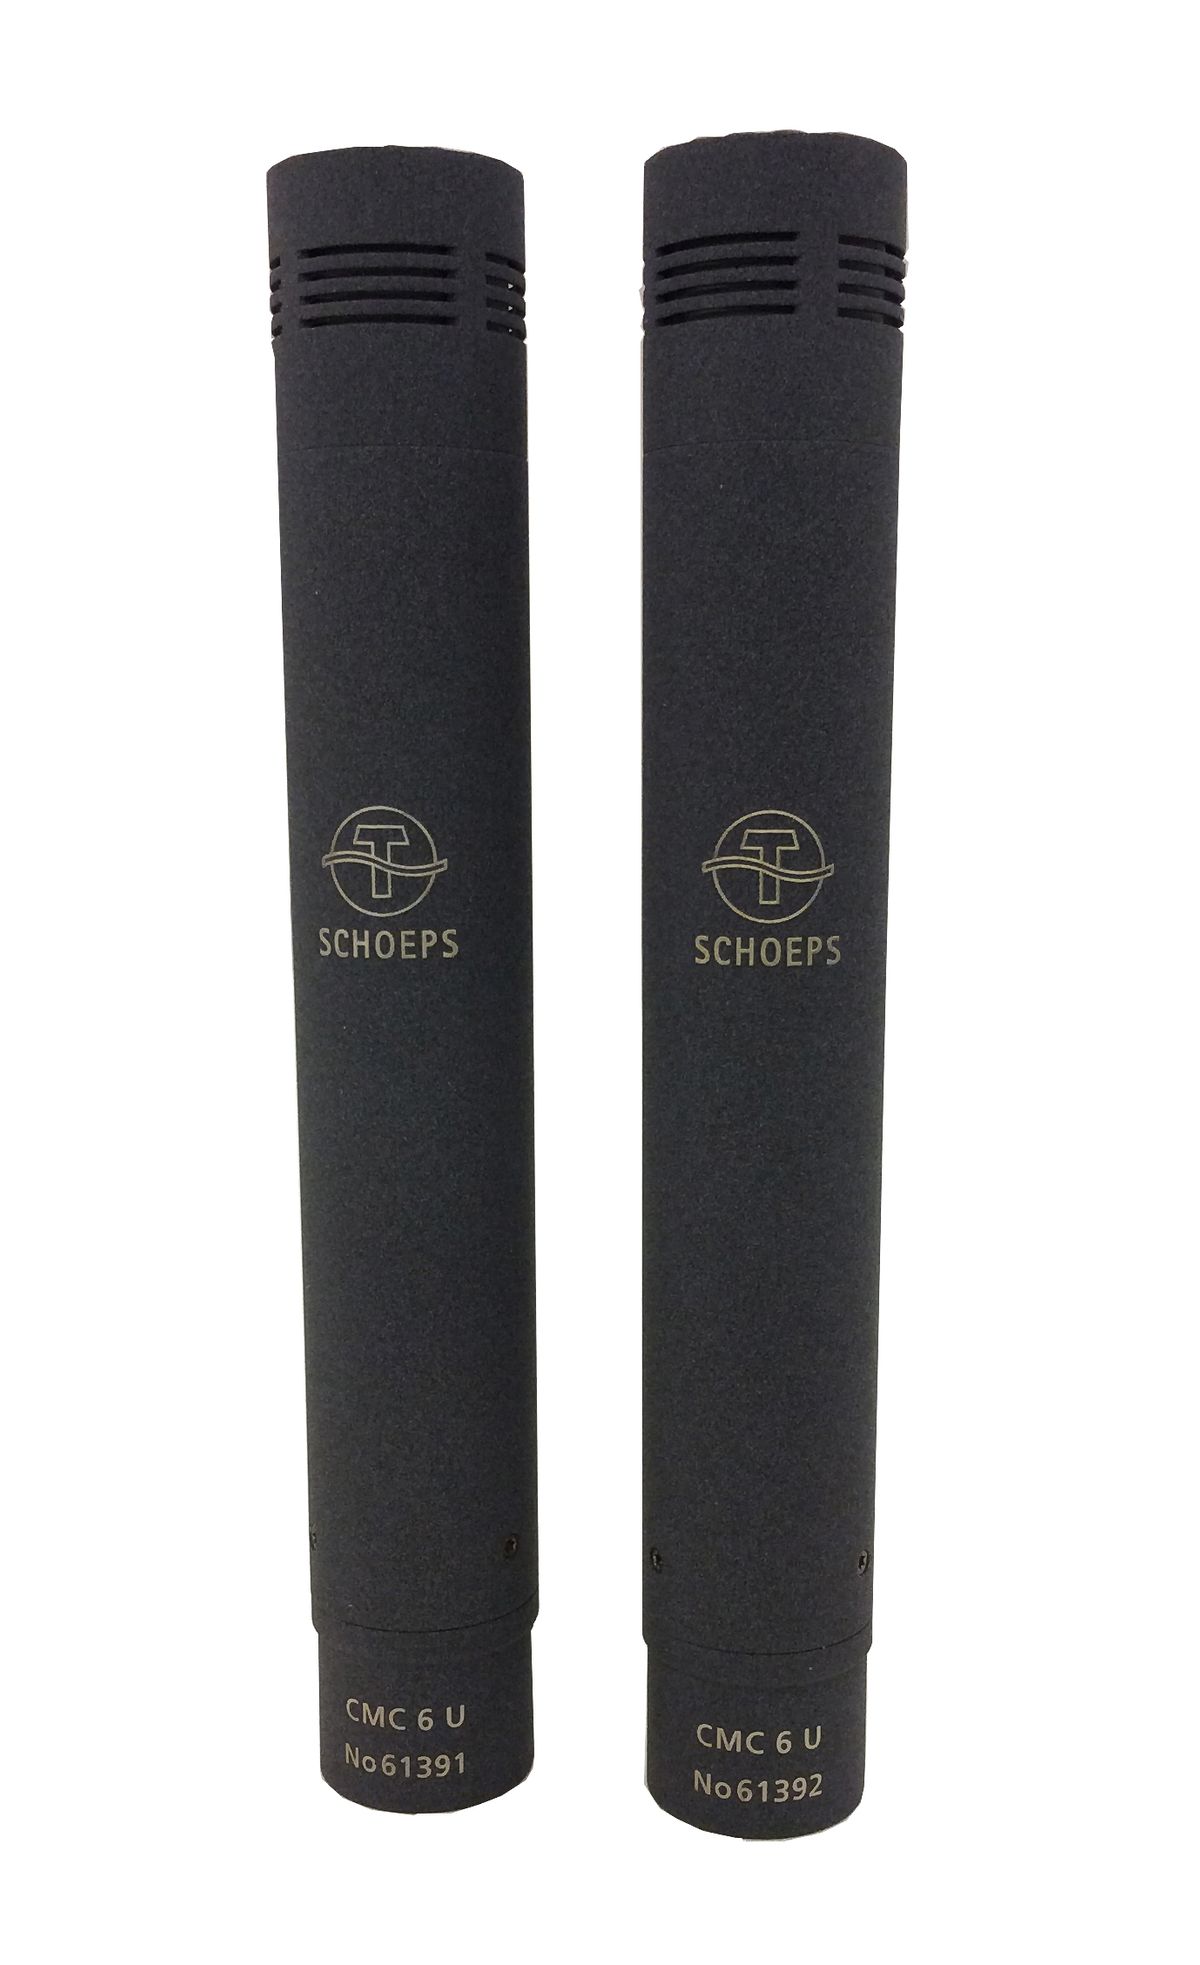 Schoeps CMC6-U and Schoeps MK41 at Hollywood Sound Systems